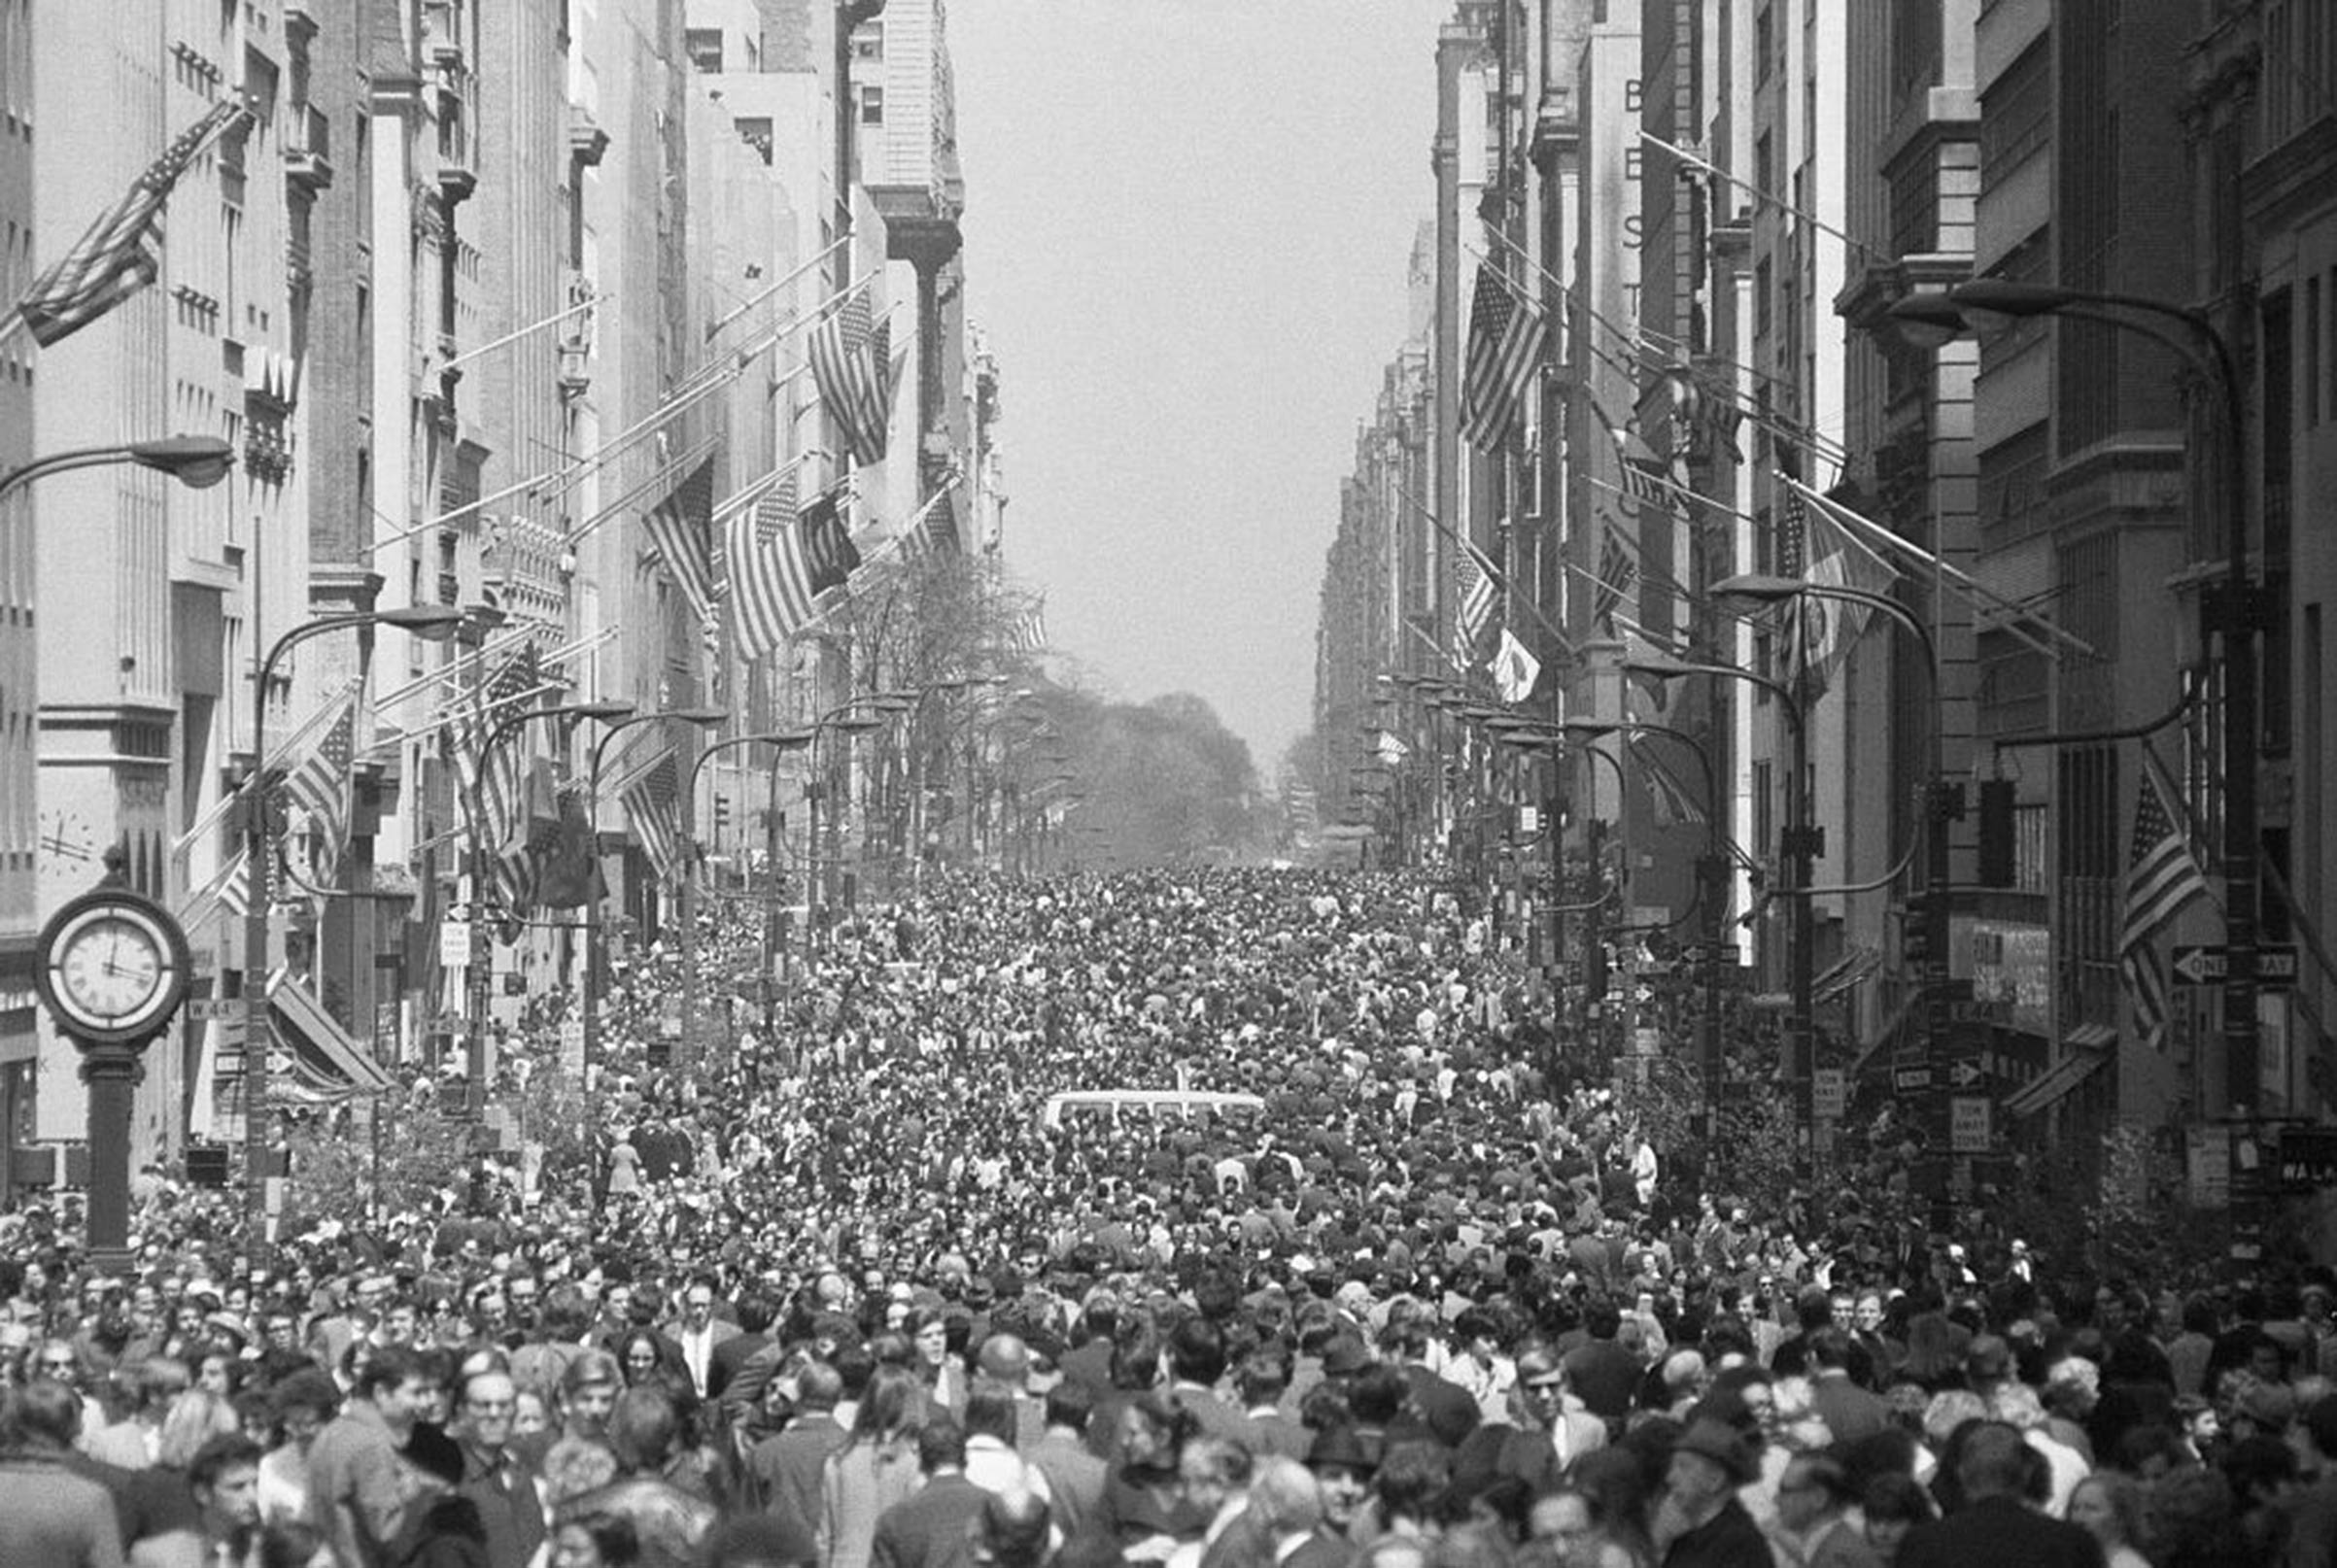 Manhattan's Fifth Avenue was closed to motor vehicle traffic for the first Earth Day on April 22, 1970. (Bettmann—Getty Images)